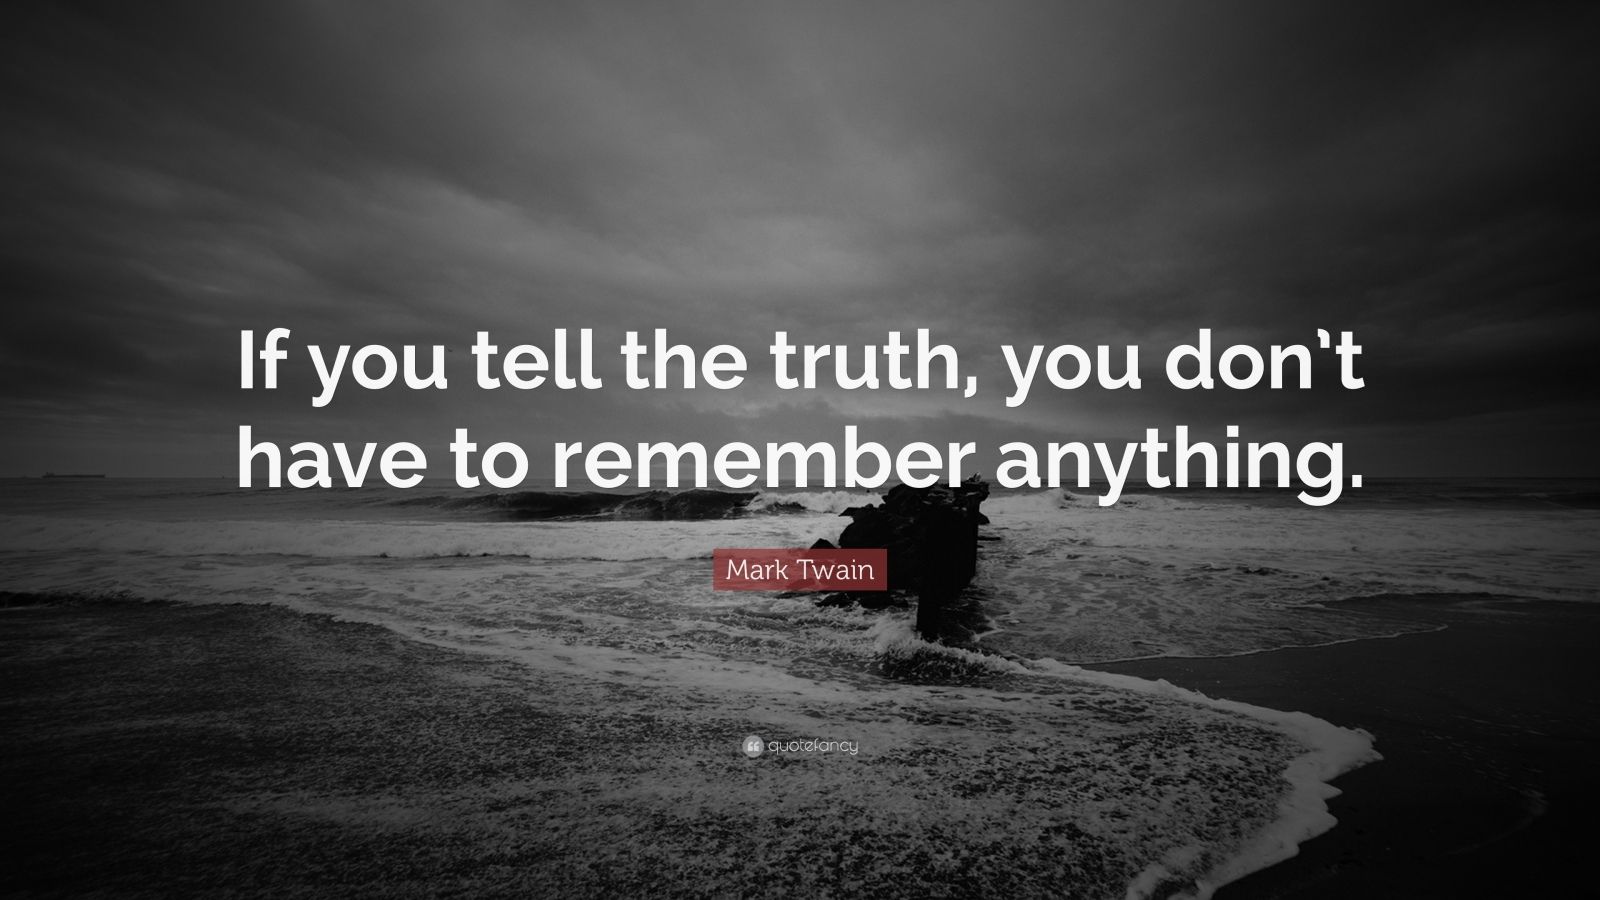 Mark Twain Quote: "If you tell the truth, you don't have ...